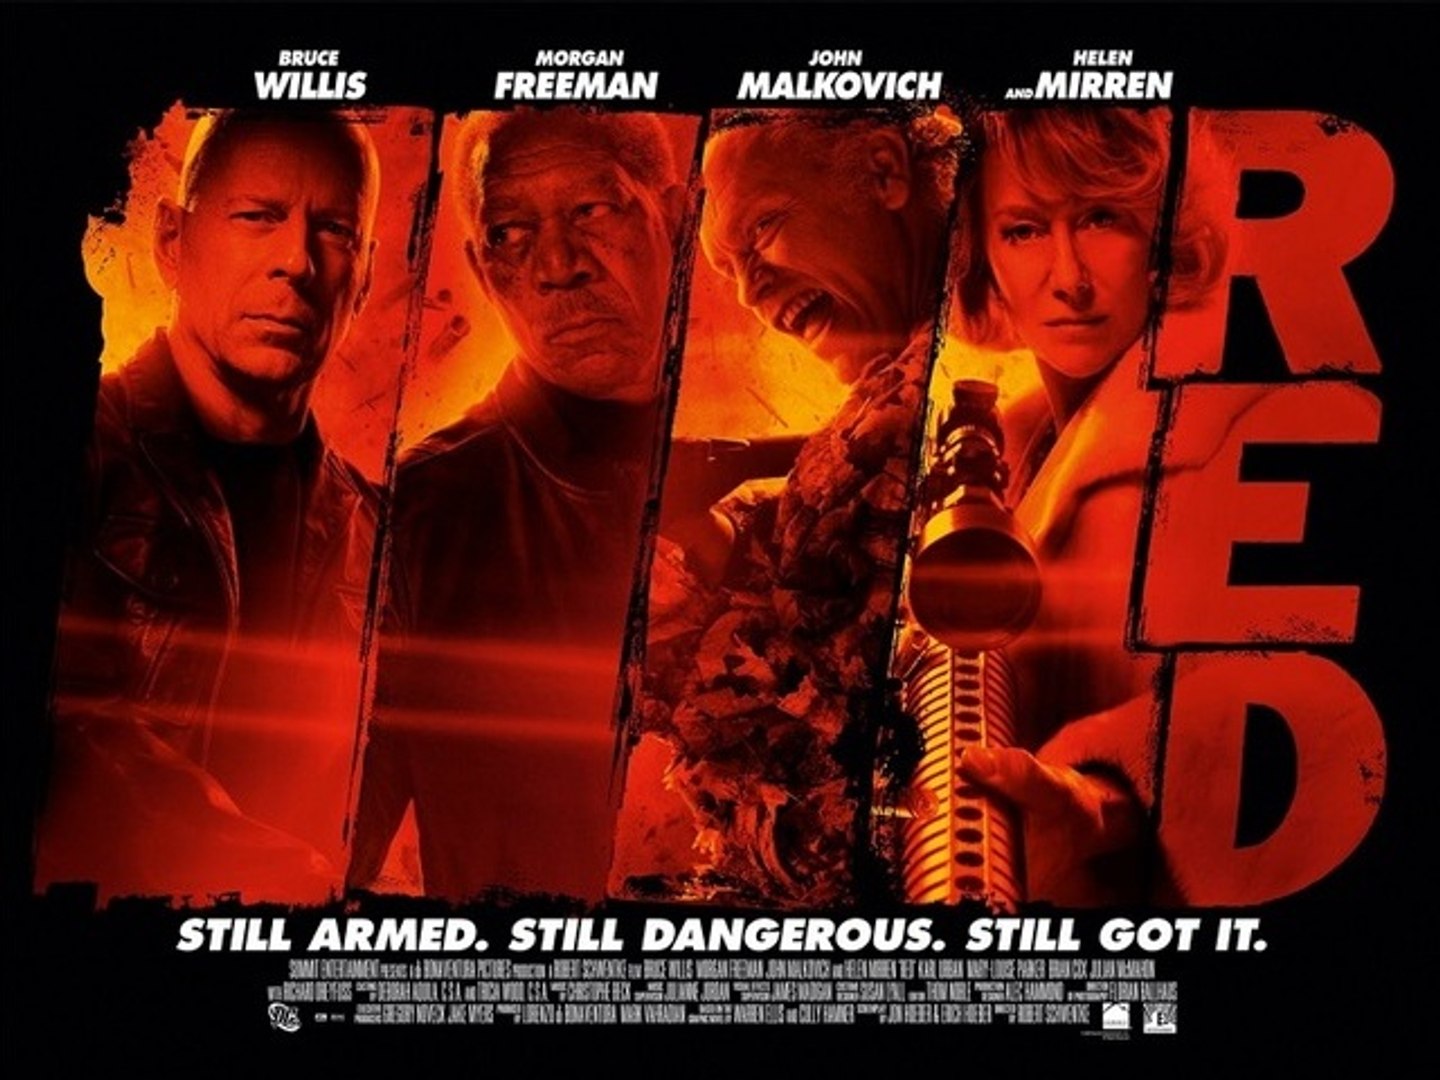 RED  trailer #1 US (2010) 